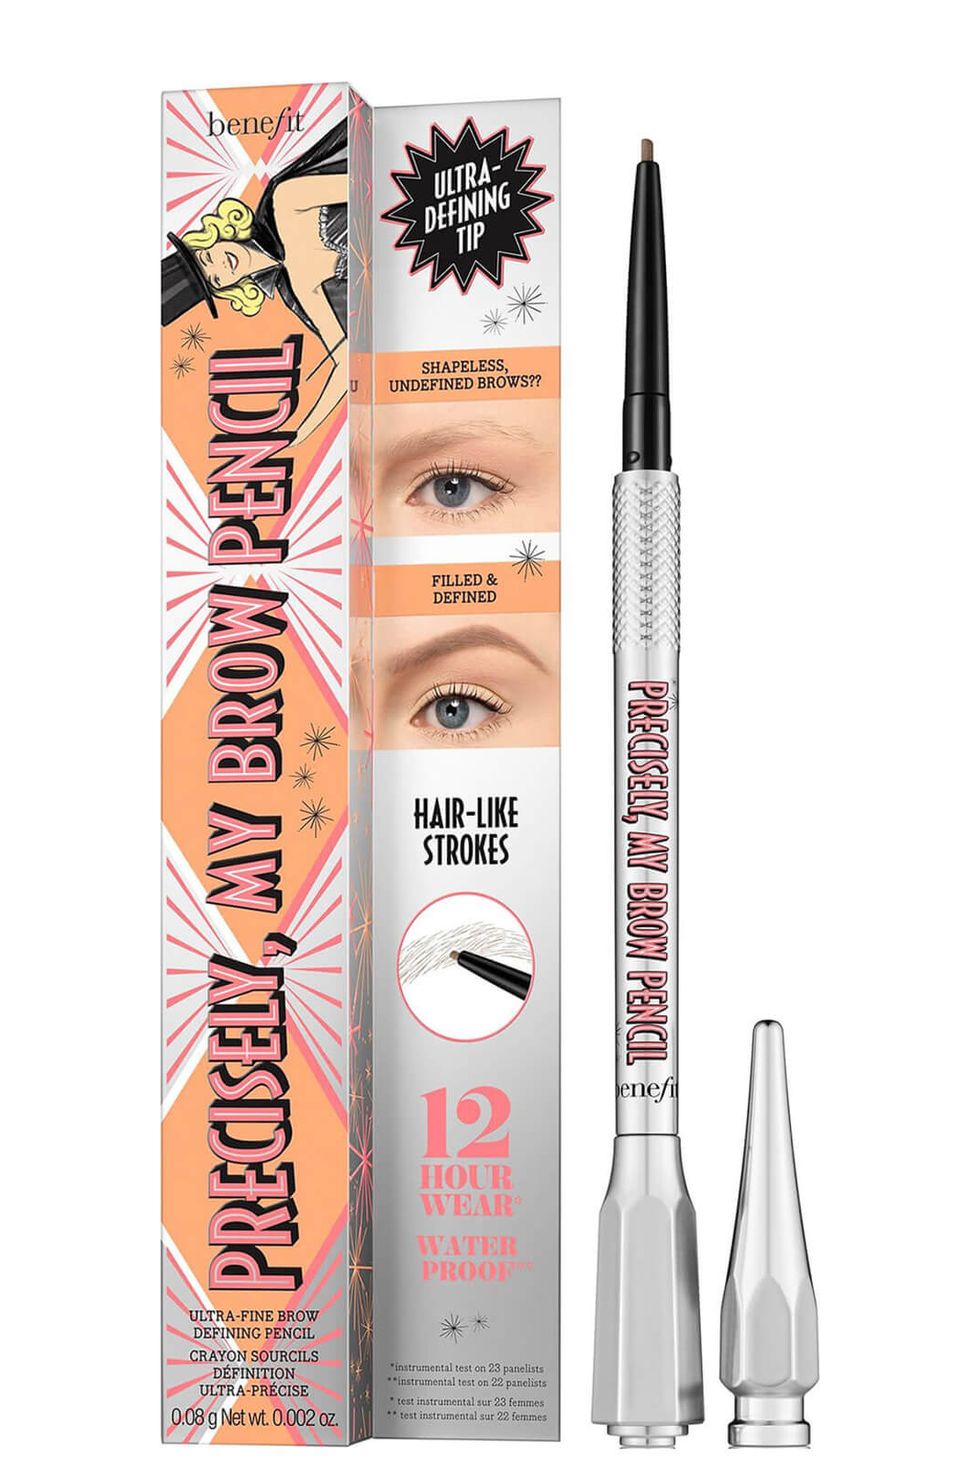 Precisely, My Brow Pencil 